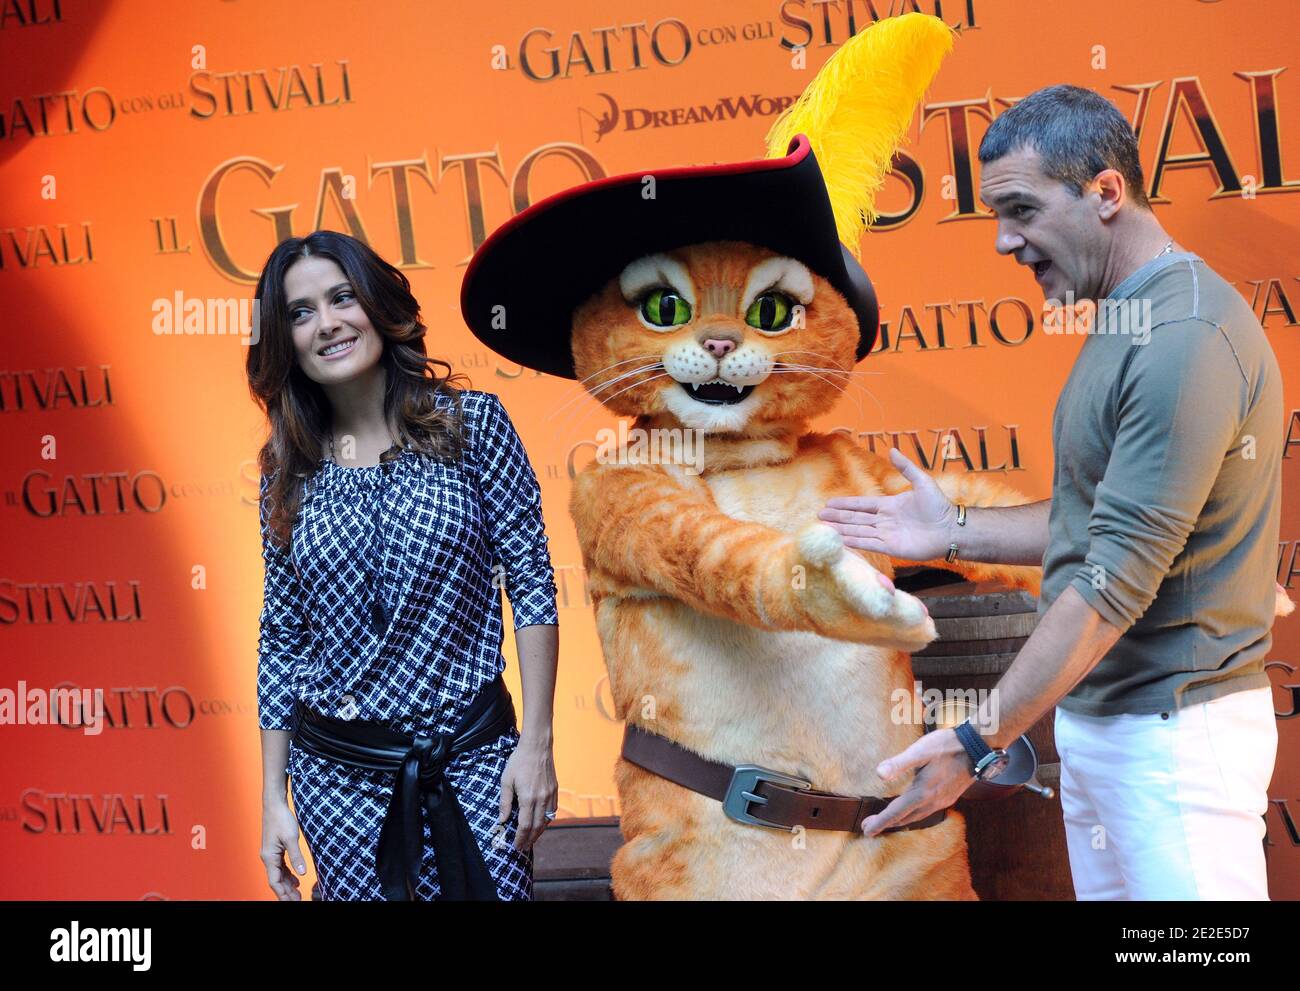 Salma Hayek and Antonio Banderas at a photocall for the Italy promotion of animated film 'Puss in Boots', at Hotel Hassler in Rome, Italy on November 25, 2011. Photo by Eric Vandeville/ABACAPRESS.COM Stock Photo